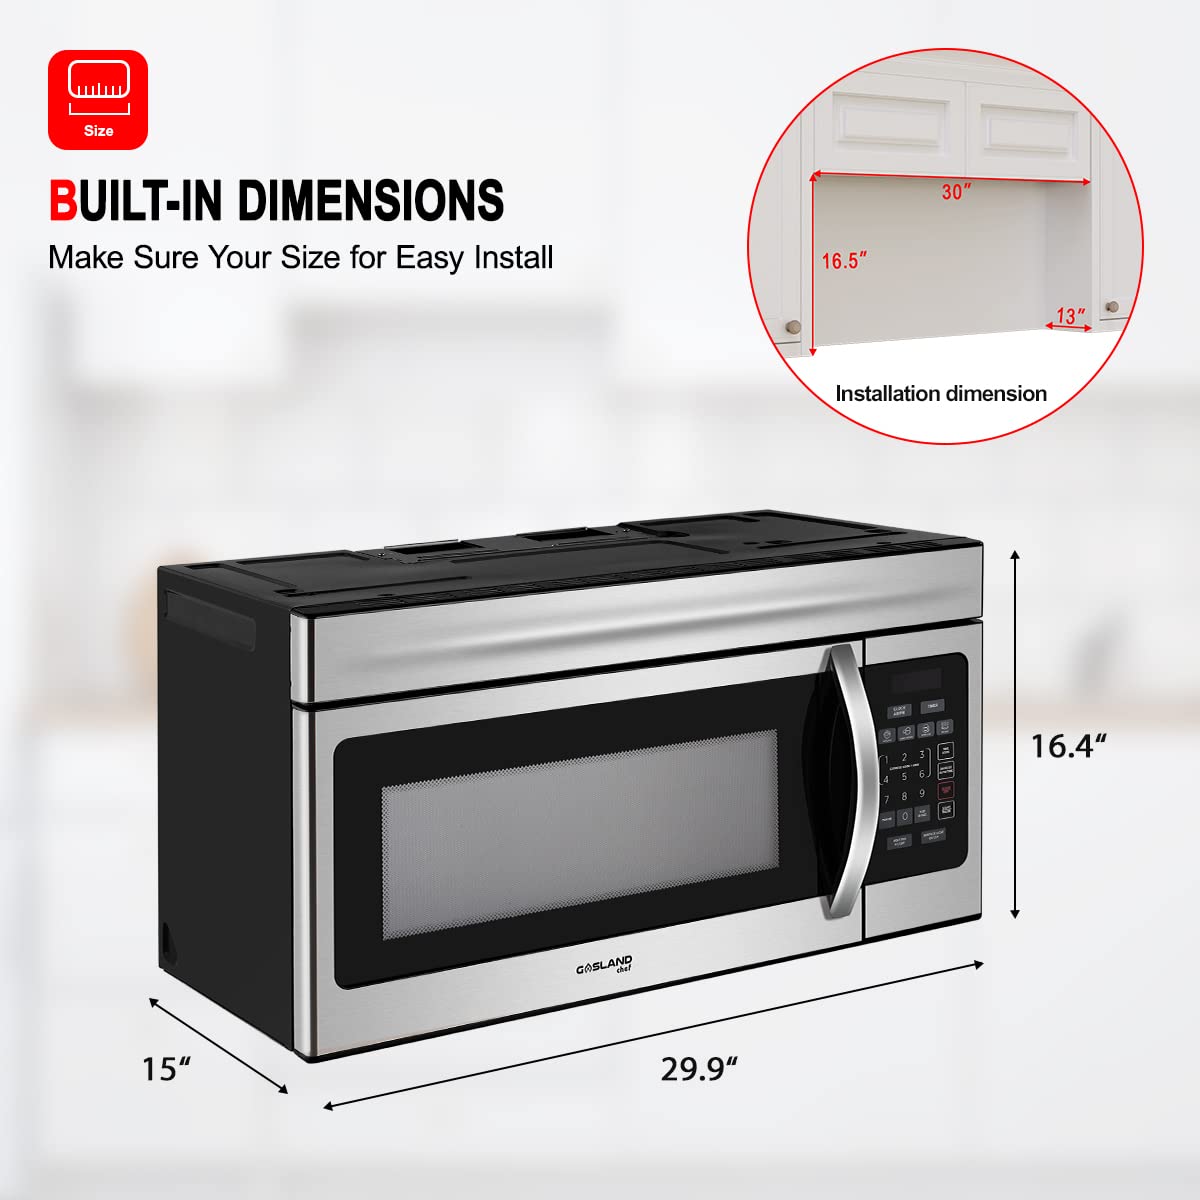 30 Inch Over-the-Range Microwave Oven, GASLAND Chef OTR1603S Over The Stove Microwave Oven with 1.6 Cu. Ft. Capacity, 1000 Watts, 300 CFM in Stainless Steel, 13" Glass Turntable, 120V, Easy Clean